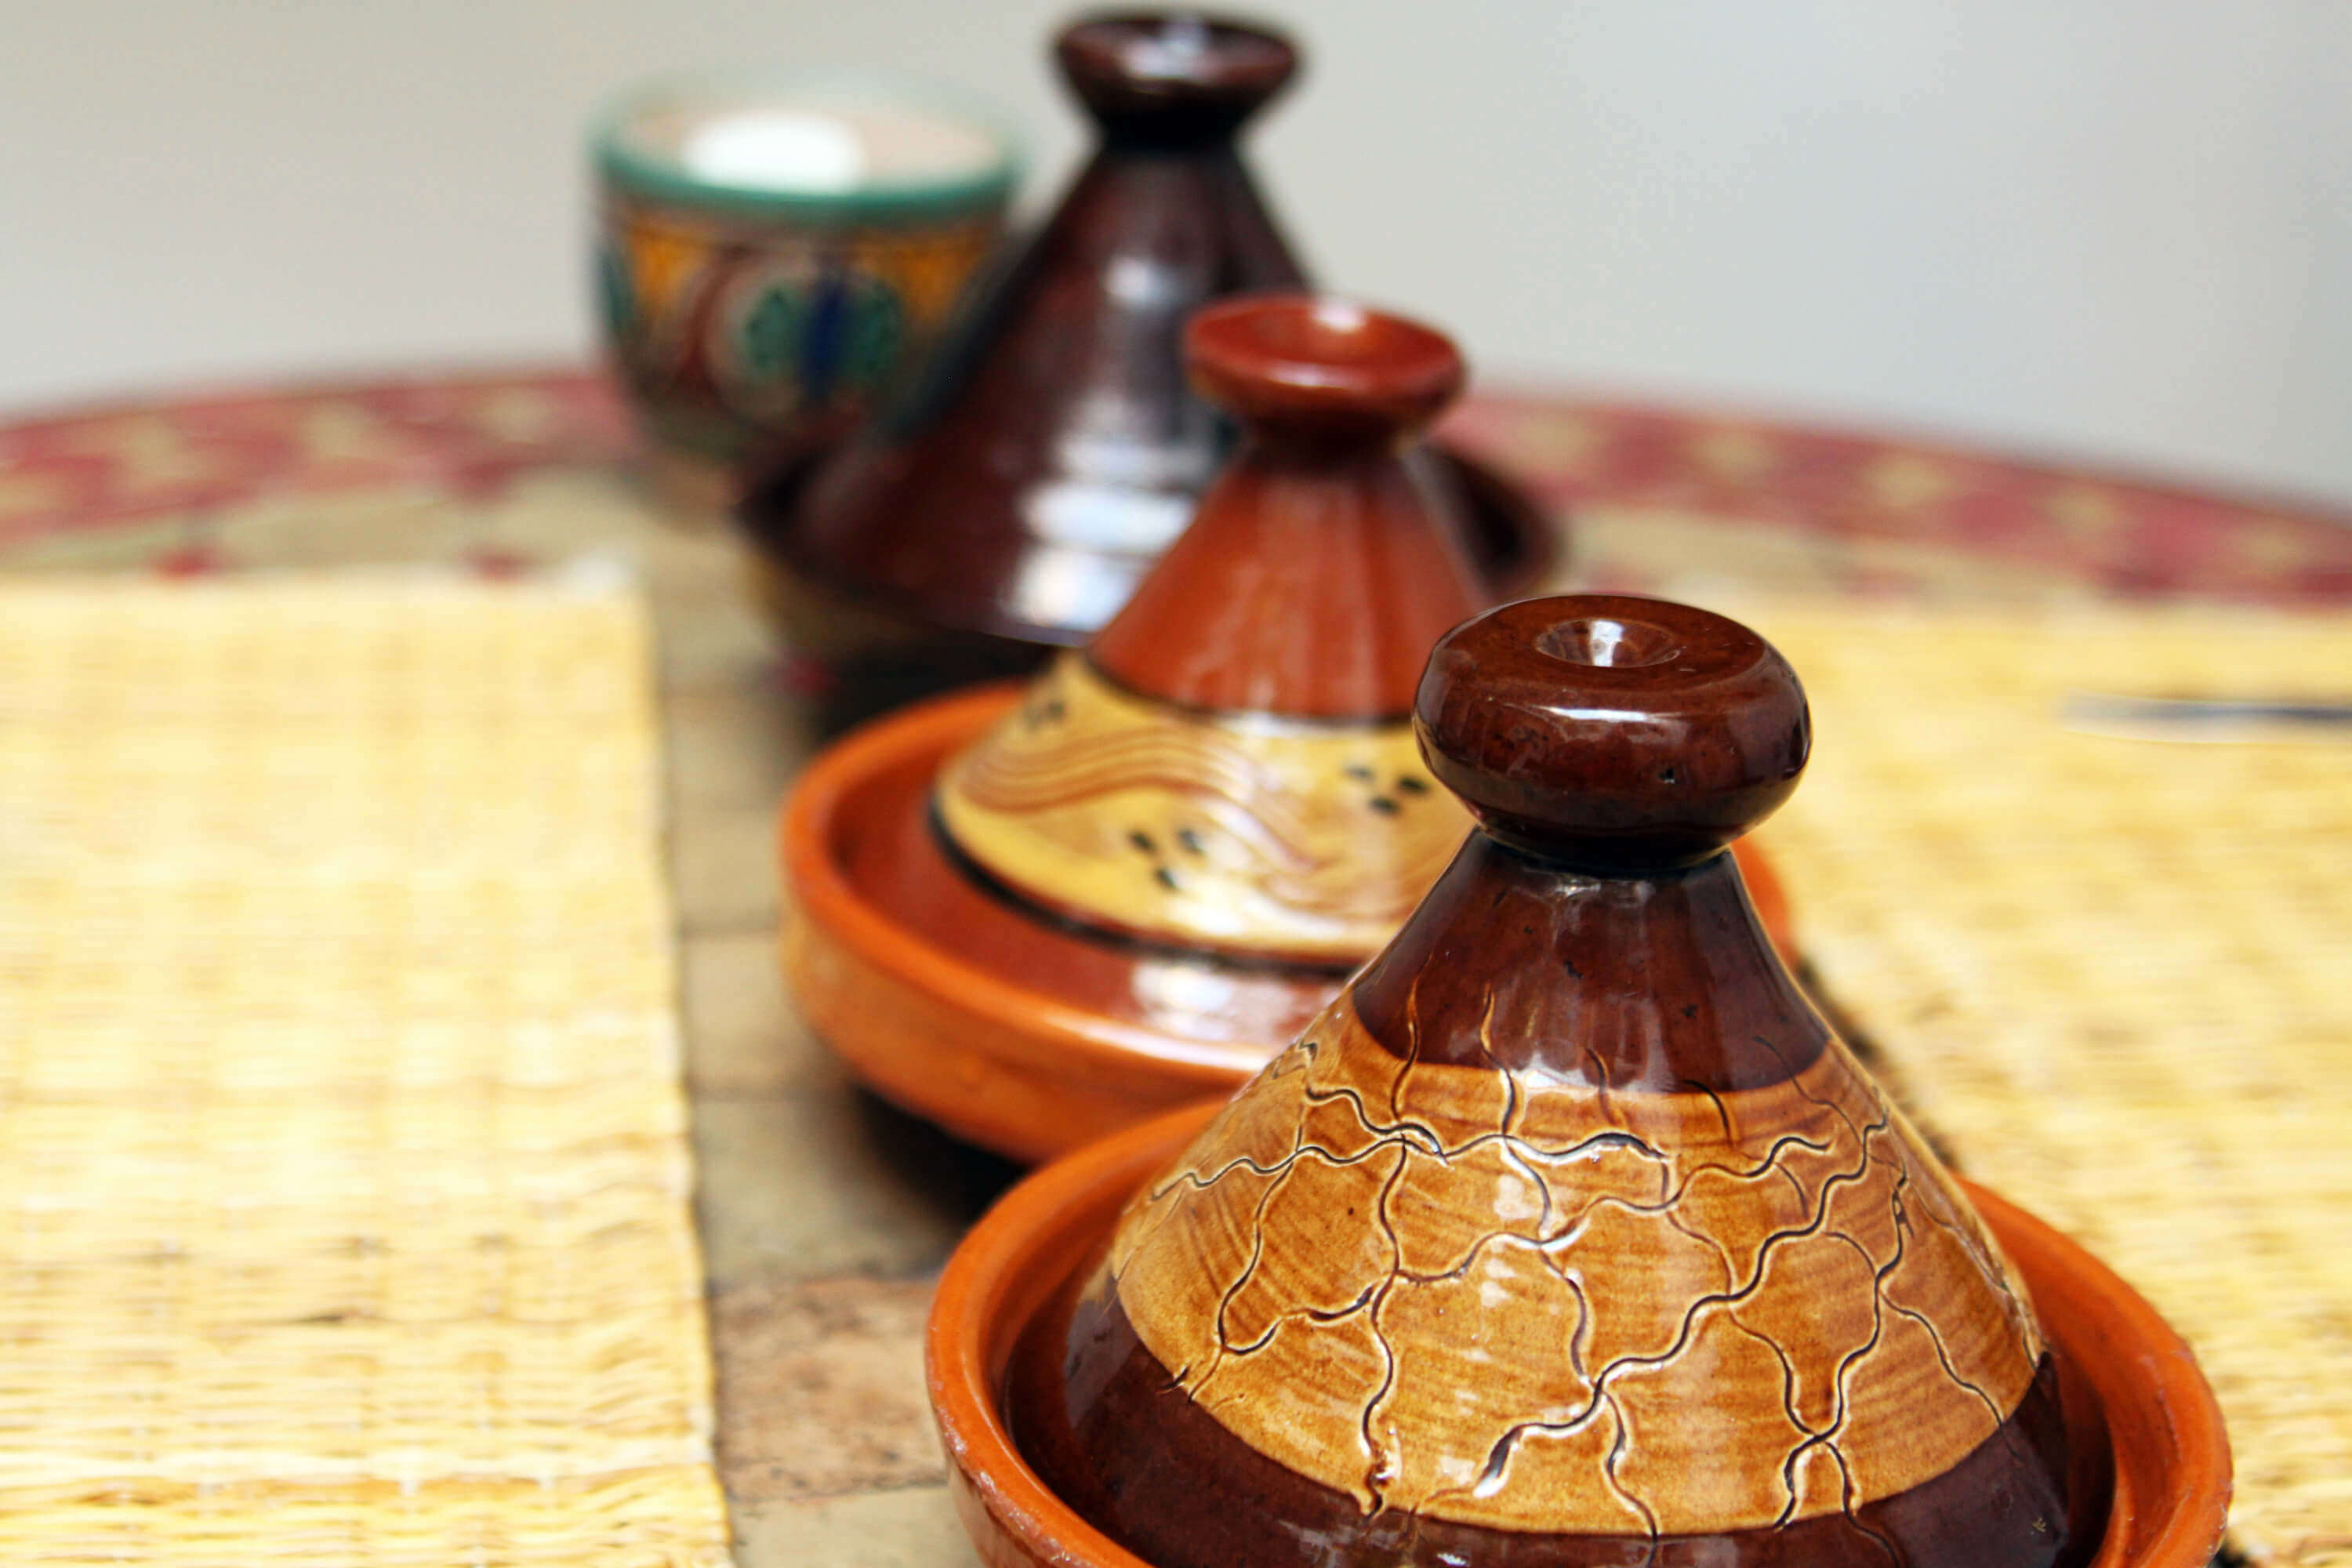 Authentic traditional ceramic Moroccan tagine pots in a row